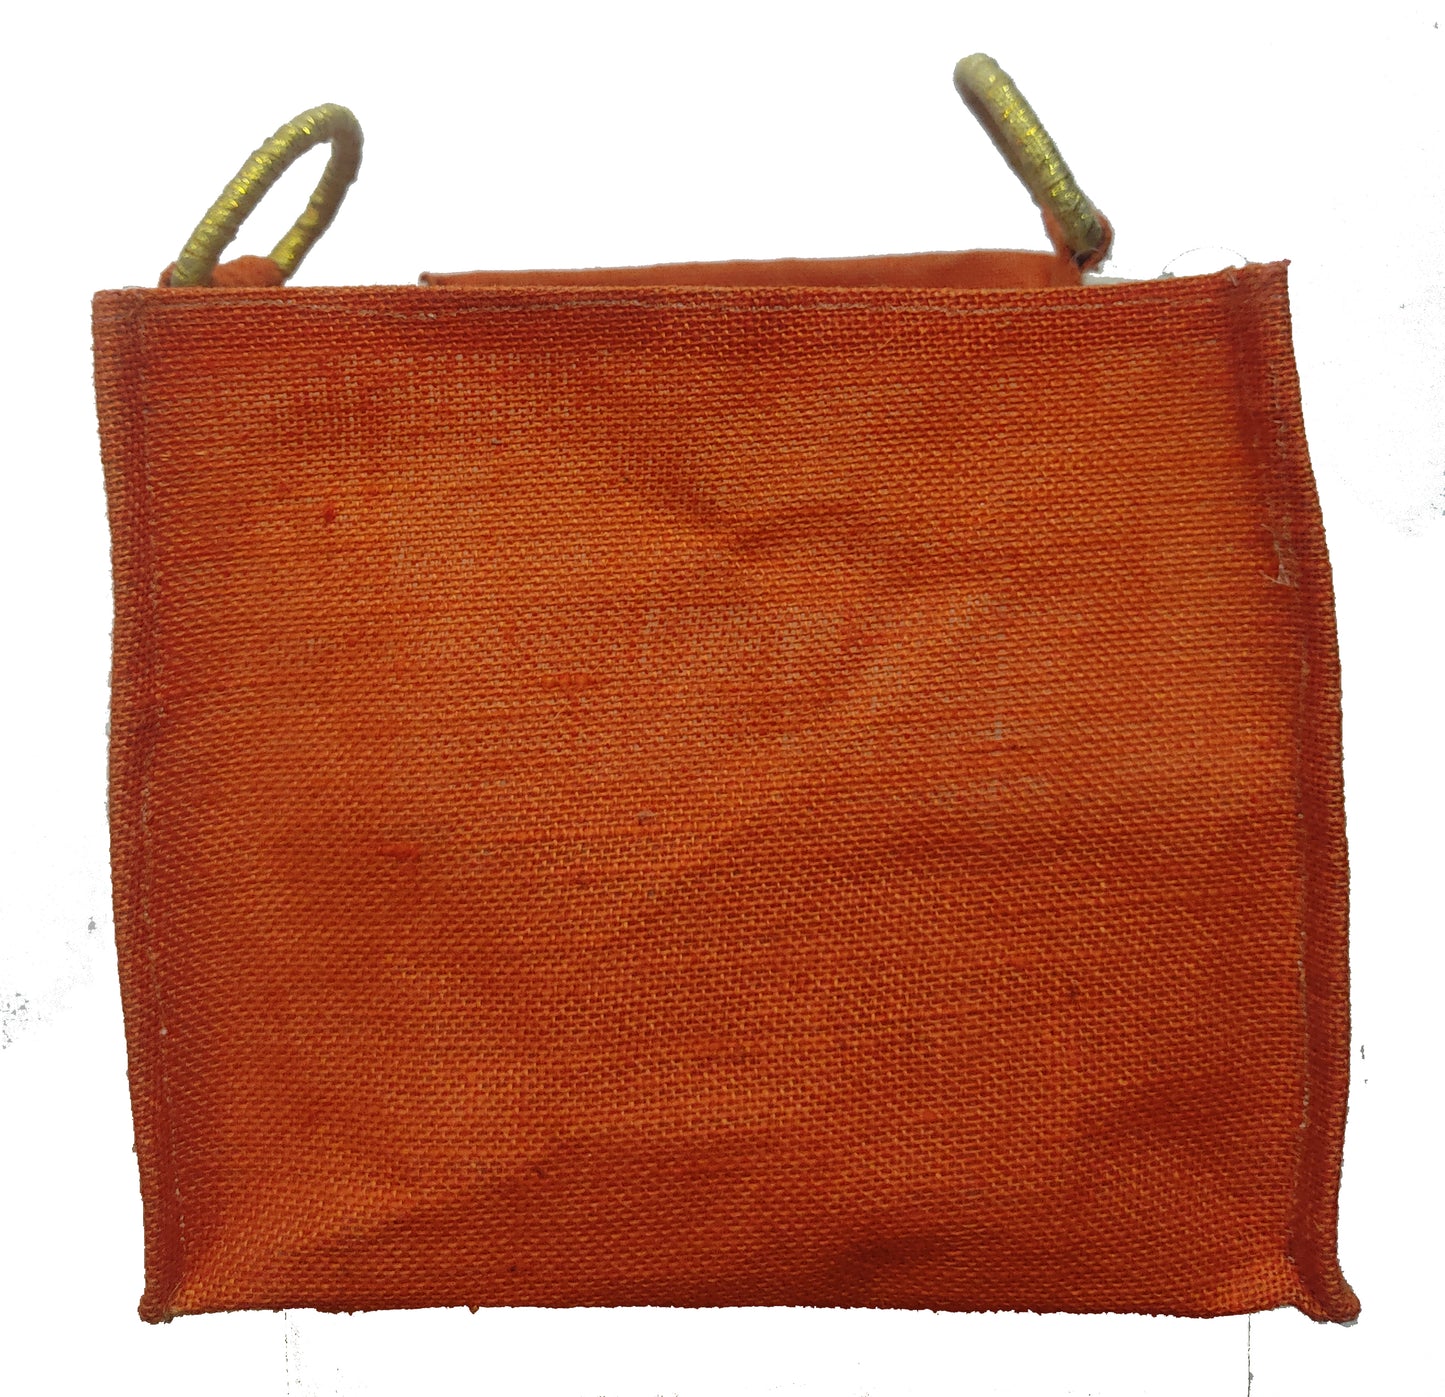 Natural  Jute Bags with Orange Colors for Sweet Box ,Wedding bags (Set of 2)